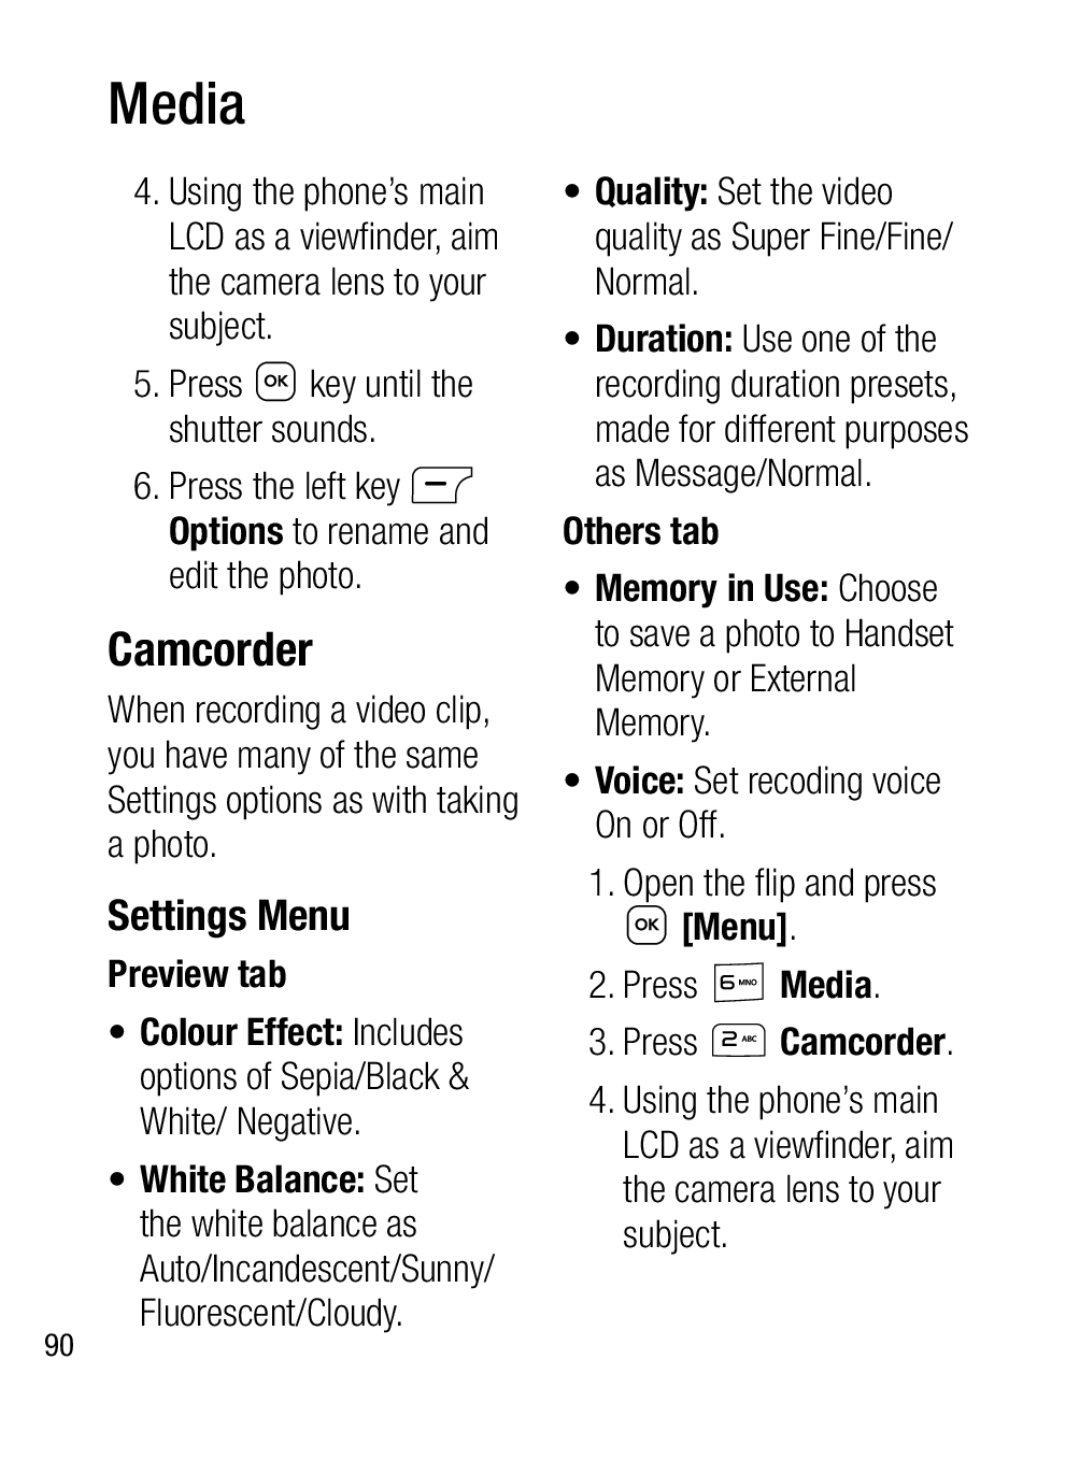 LG Electronics A133CH manual Quality Set the video quality as Super Fine/Fine/ Normal, Press Media 3. Press Camcorder 